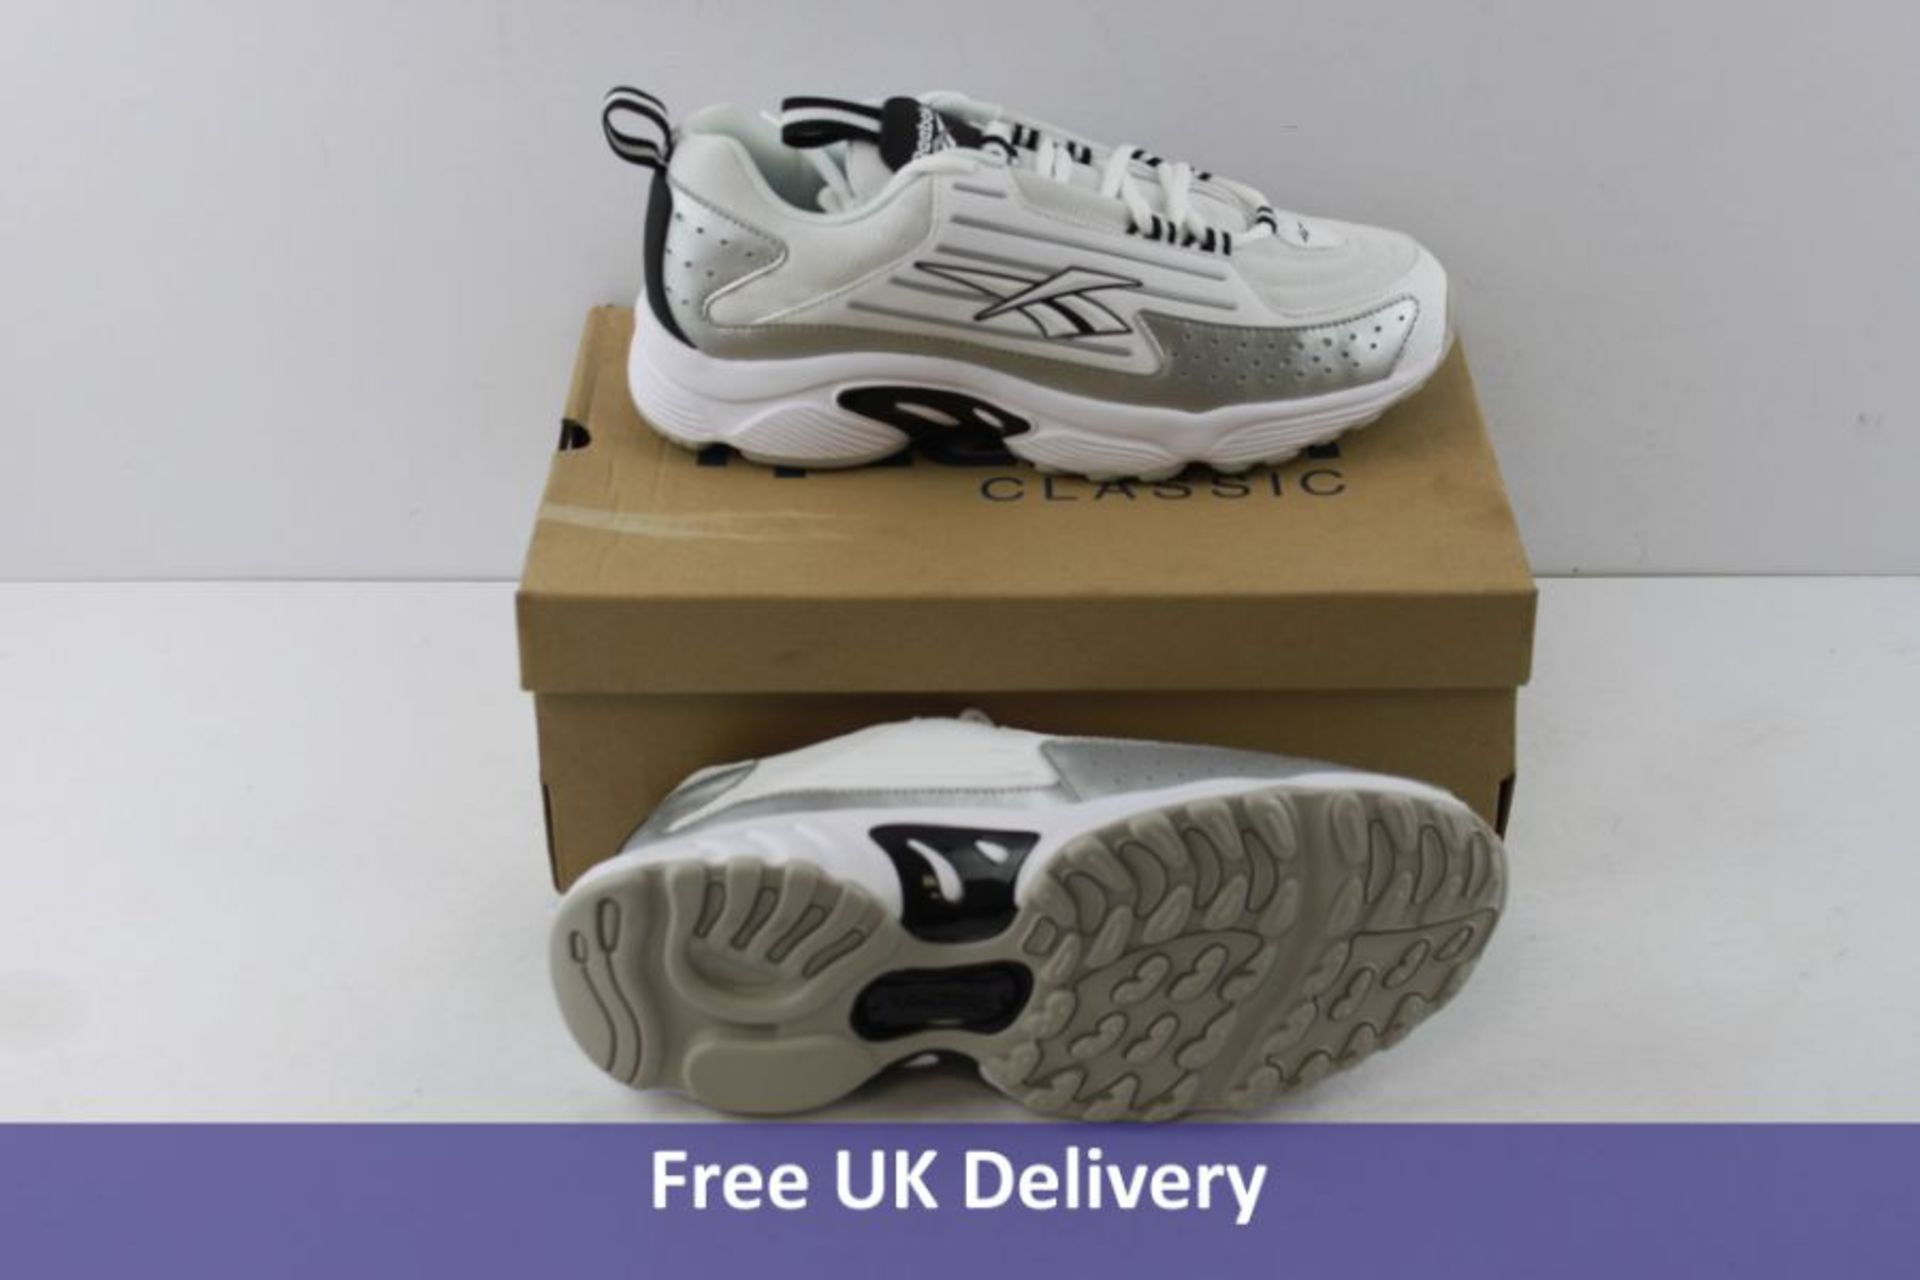 Reebok Classic Unisex DMX Series 2200 Trainers, White and Silver, UK 6.5